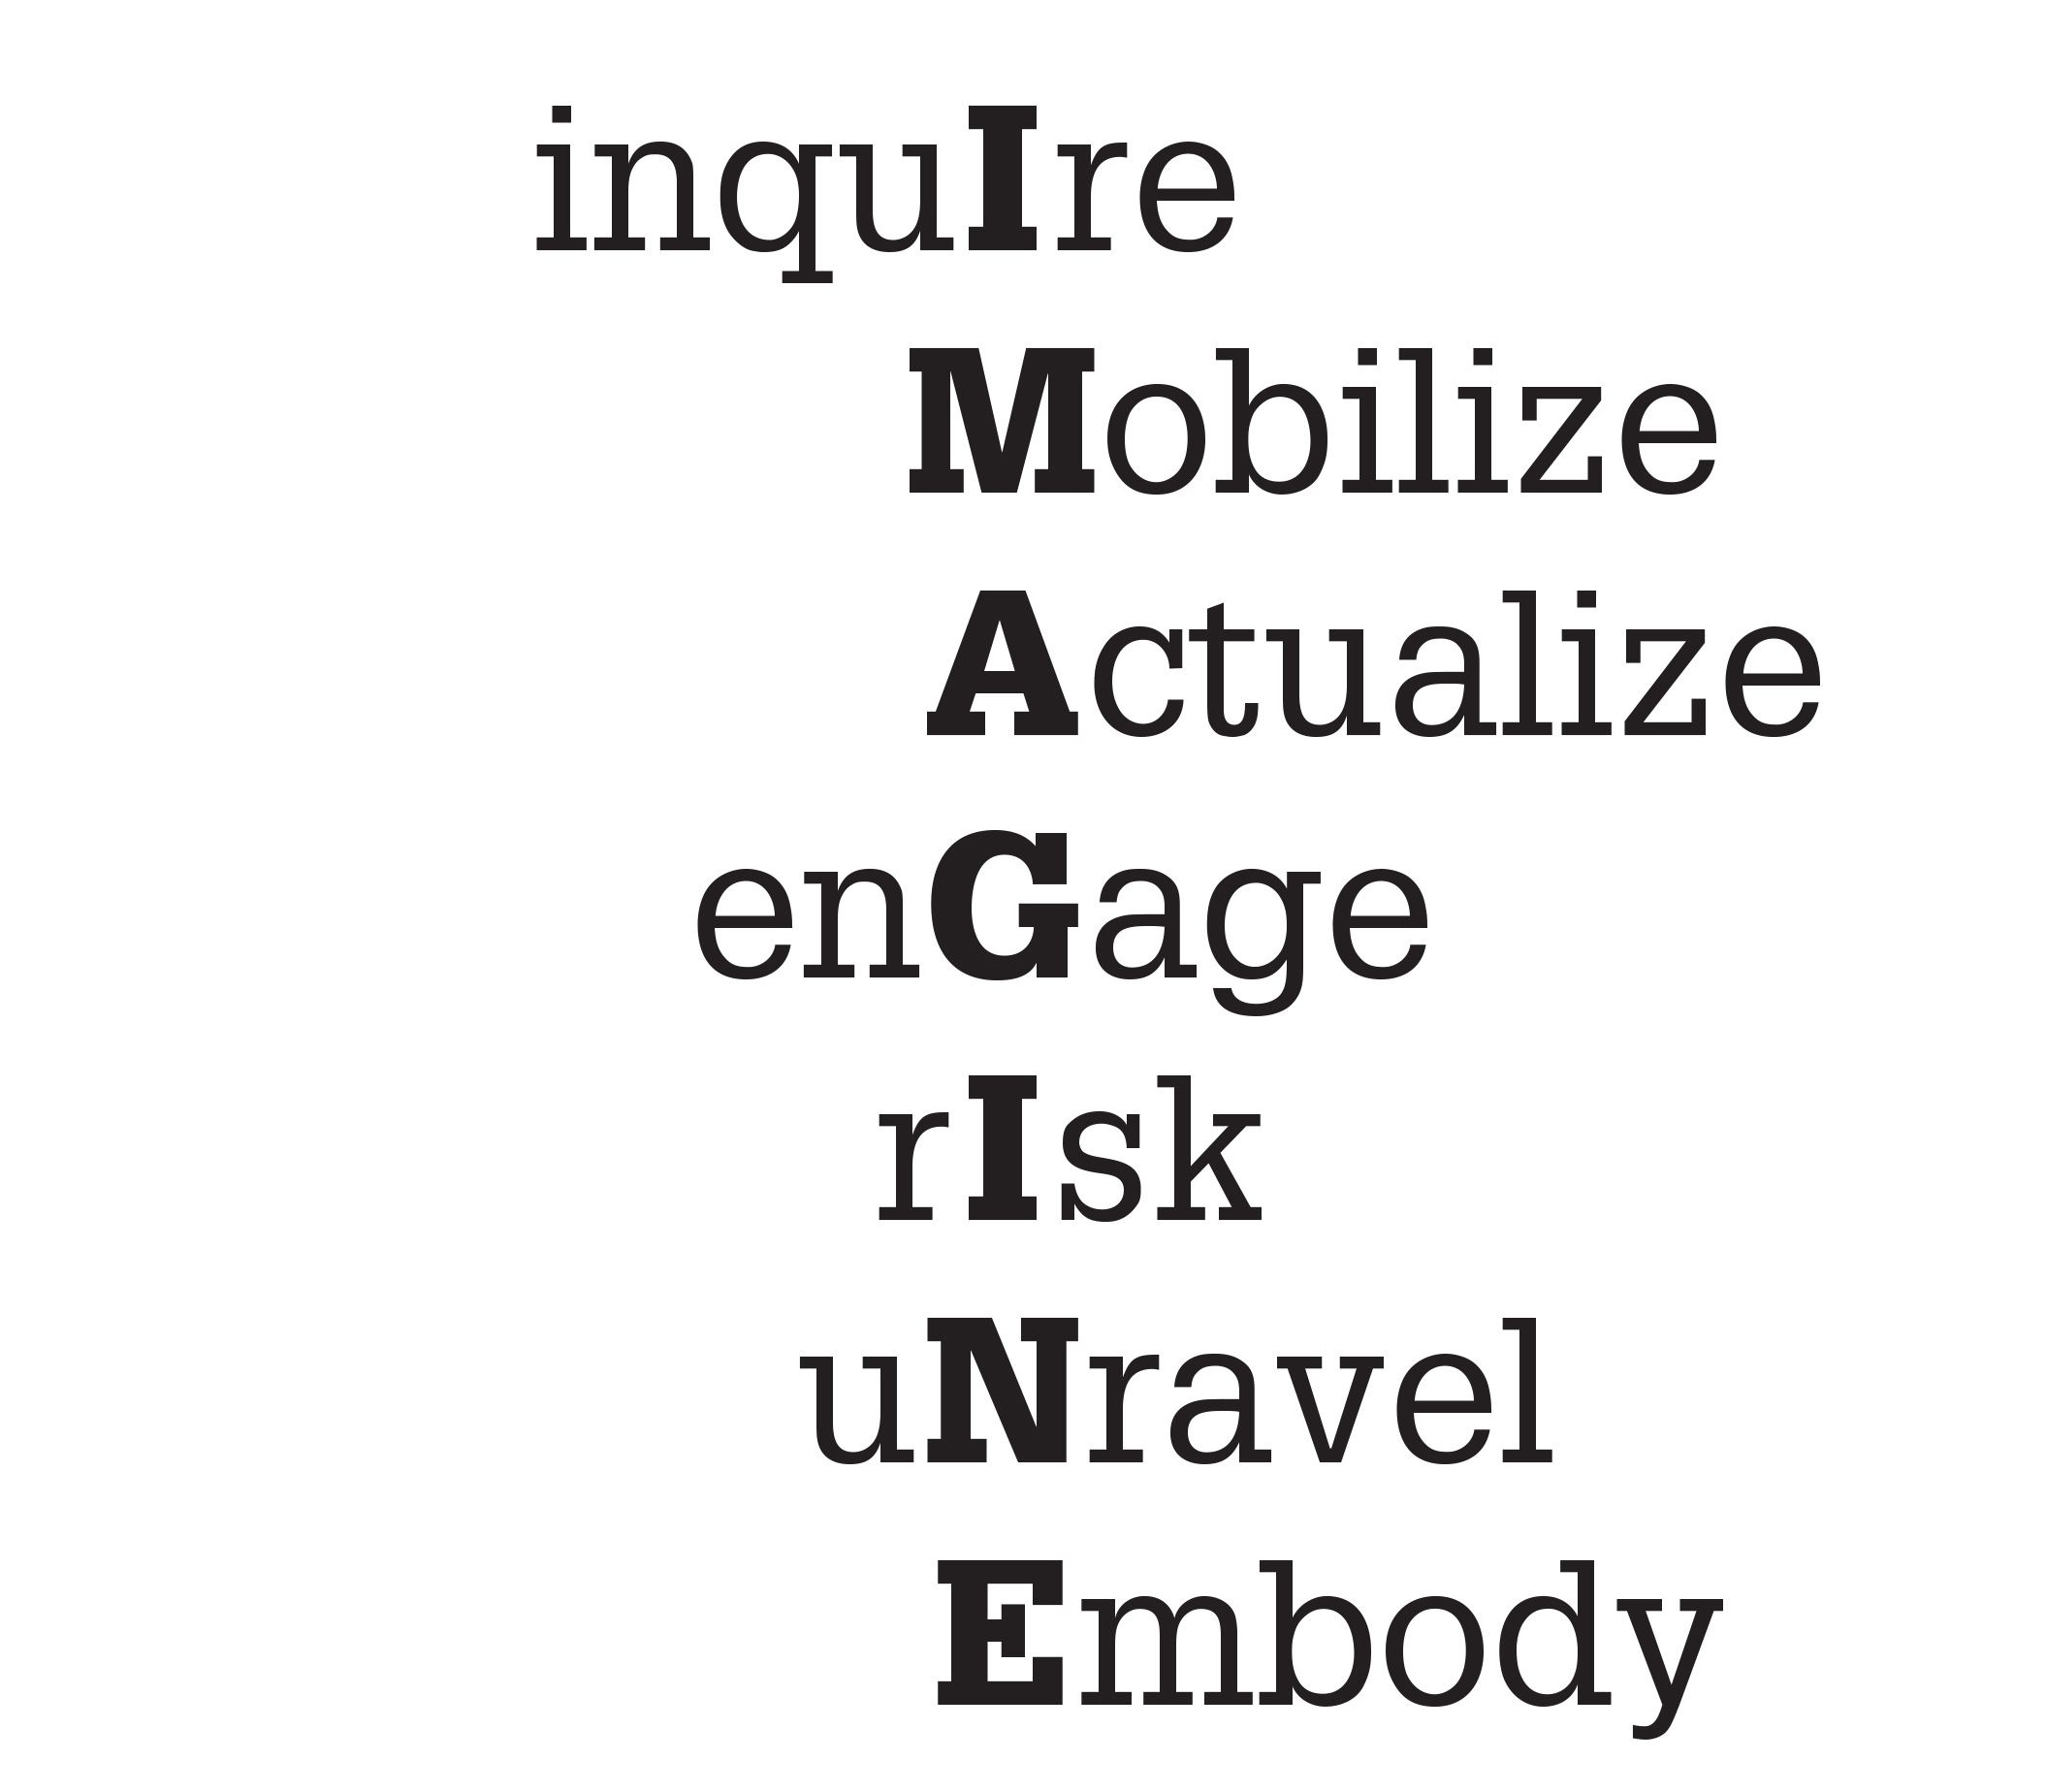 Inquire, Mobilize, Actualize, Engage, Risk, Unravel, Embody